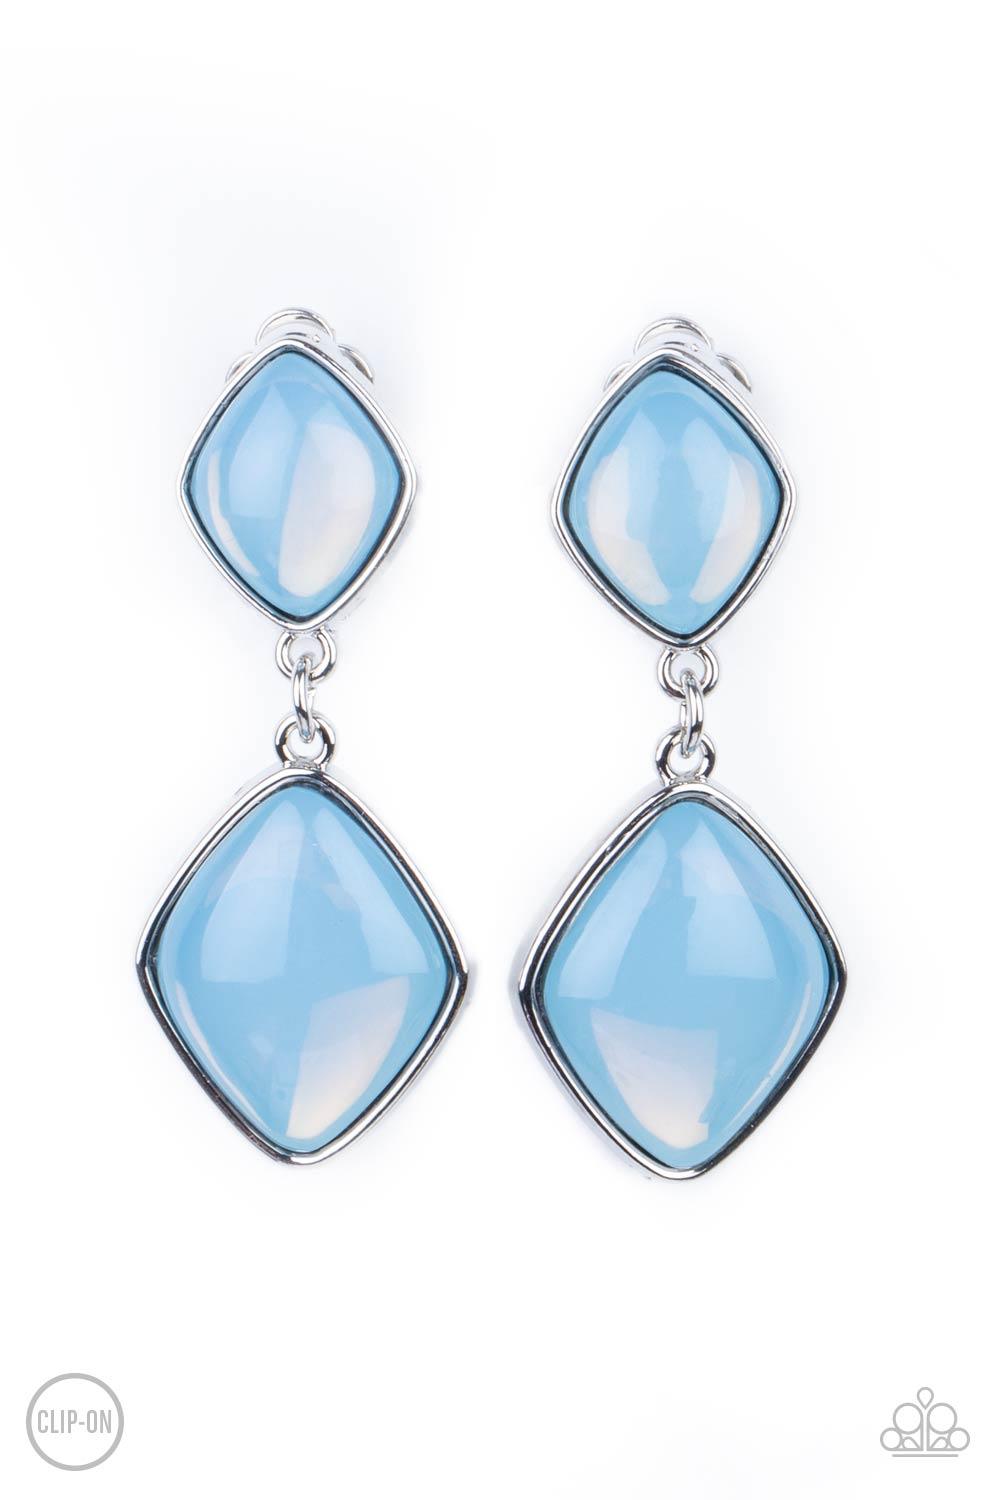 Paparazzi Accessories Double Dipping Diamonds - Blue *Clip-On A pair of diamond shaped Cerulean opals are pressed into the centers of rustic silver frames that link into an ethereal lure. Earring attaches to a standard clip-on fitting. Sold as one pair of